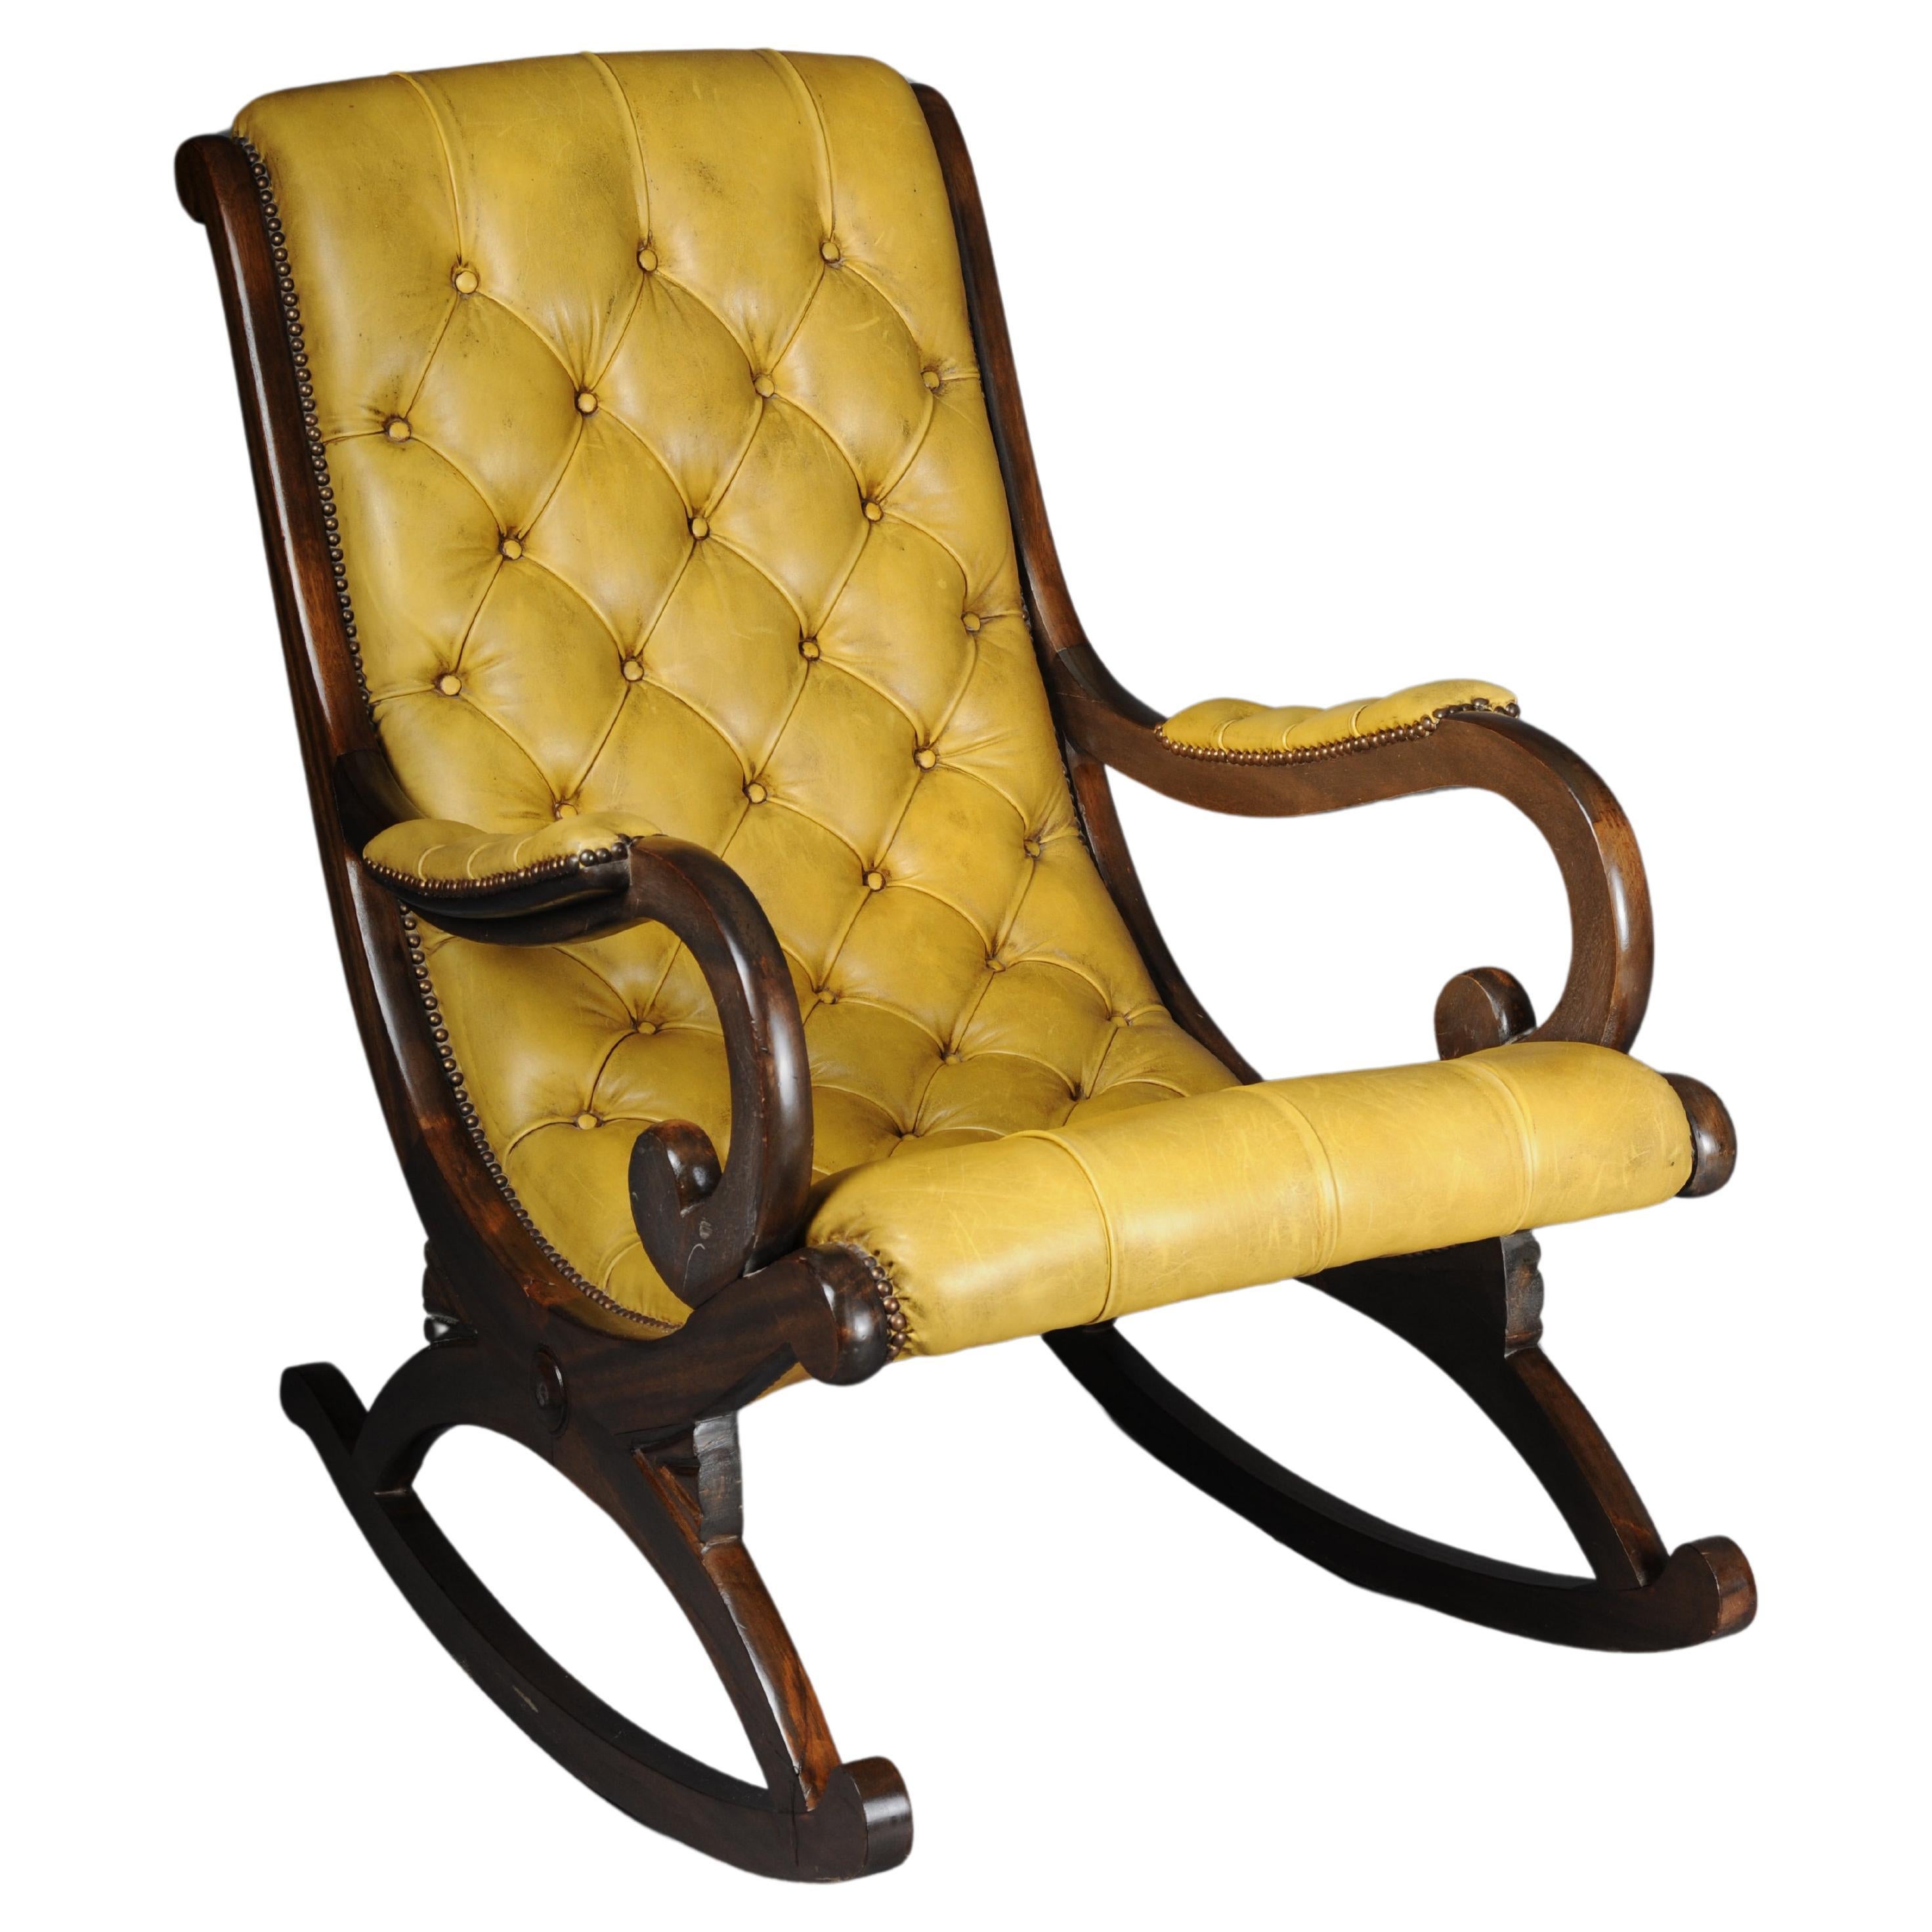 Antique English Chesterfield rocking chair For Sale